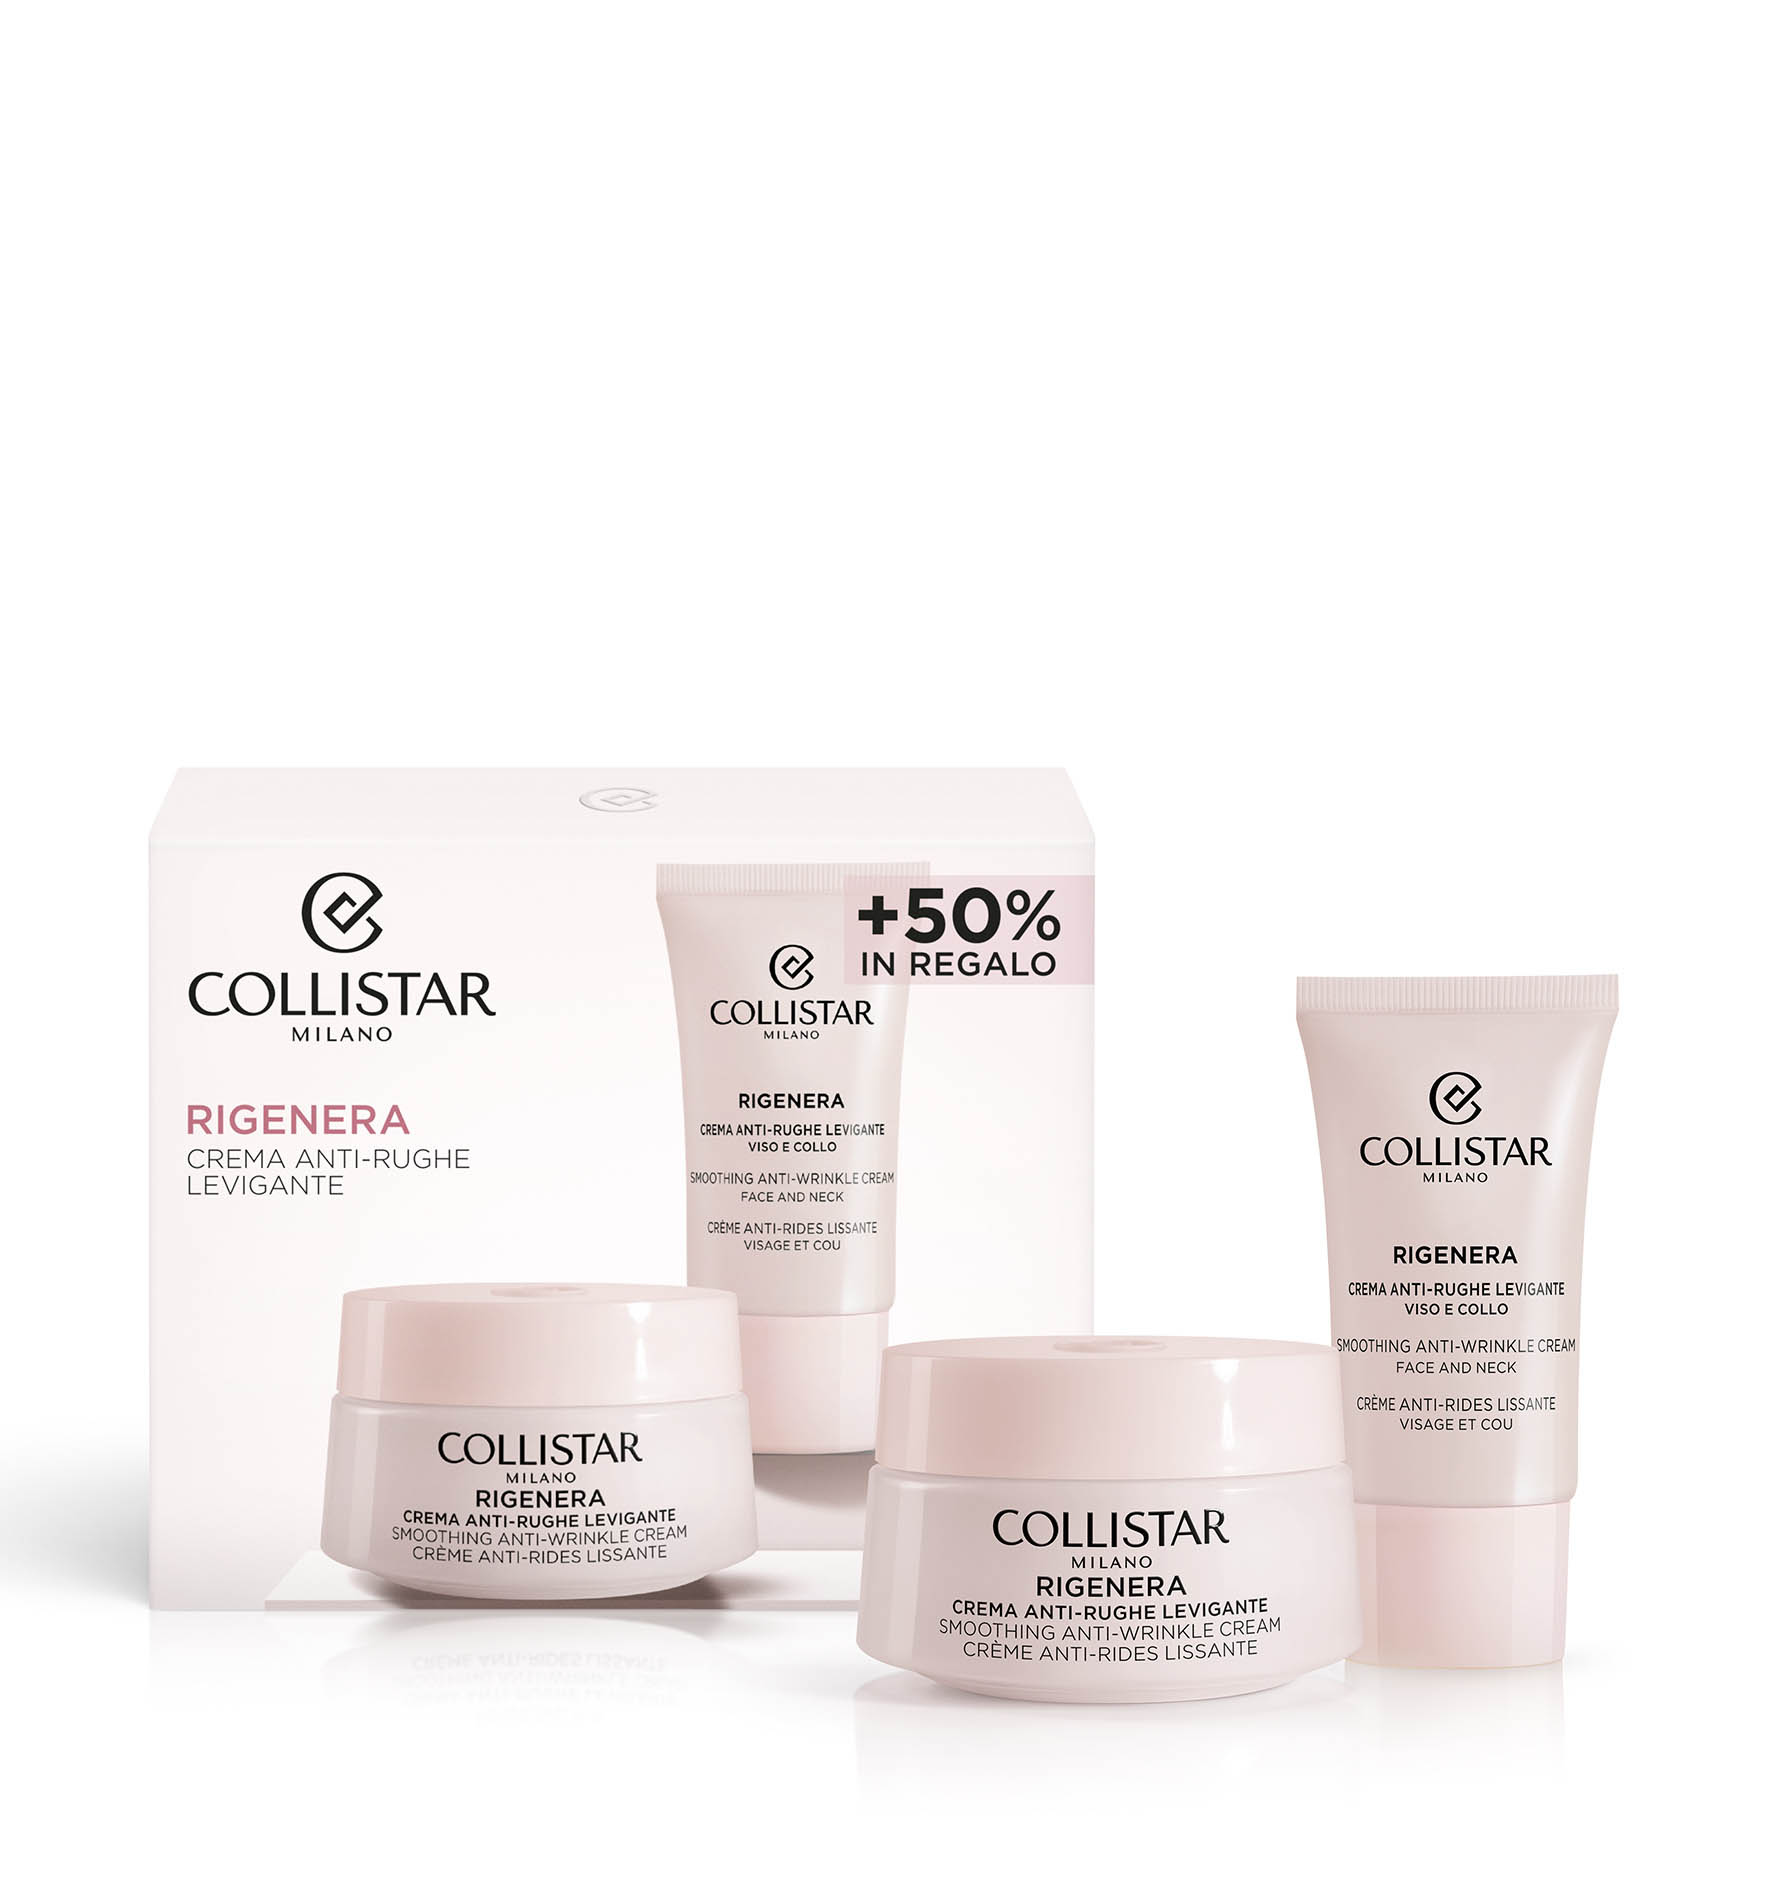 RIGENERA SMOOTHING ANTI-WRINKLE CREAM 50 ml SET - PROMOTIONS | Collistar - Shop Online Ufficiale